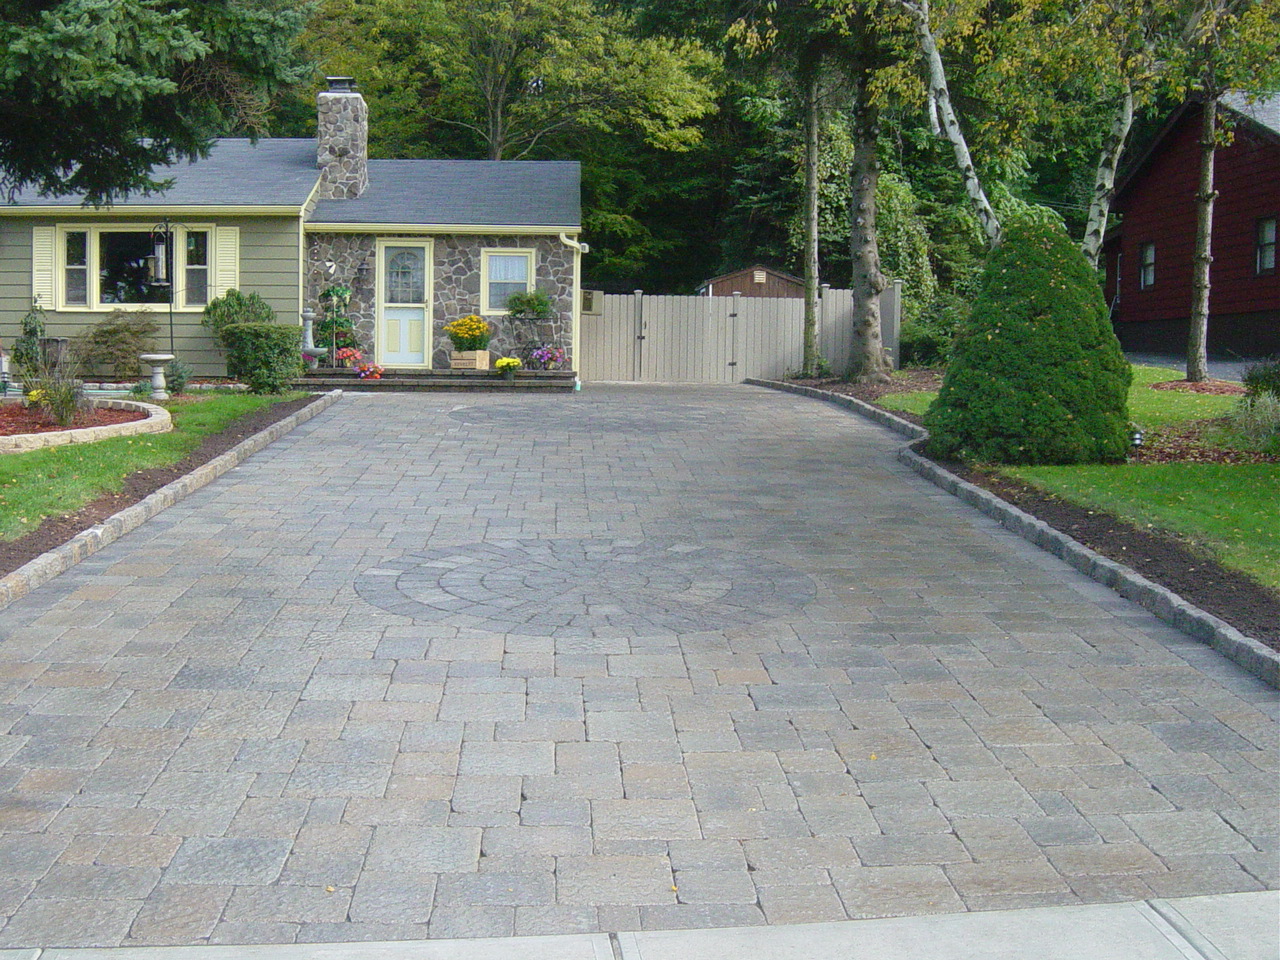 After driveway